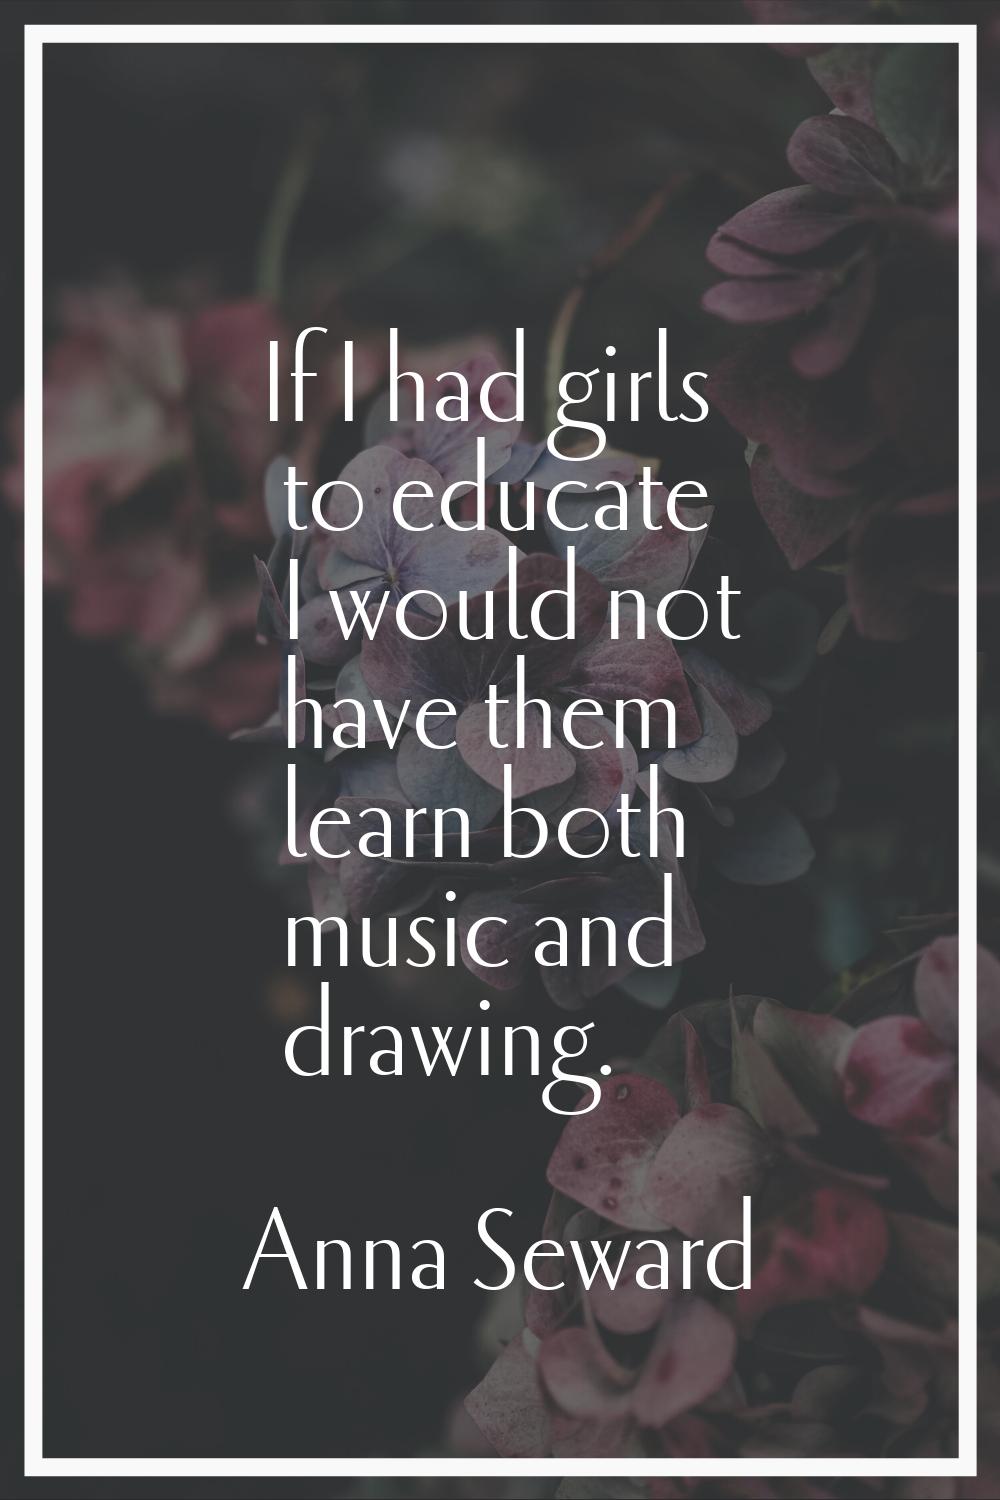 If I had girls to educate I would not have them learn both music and drawing.